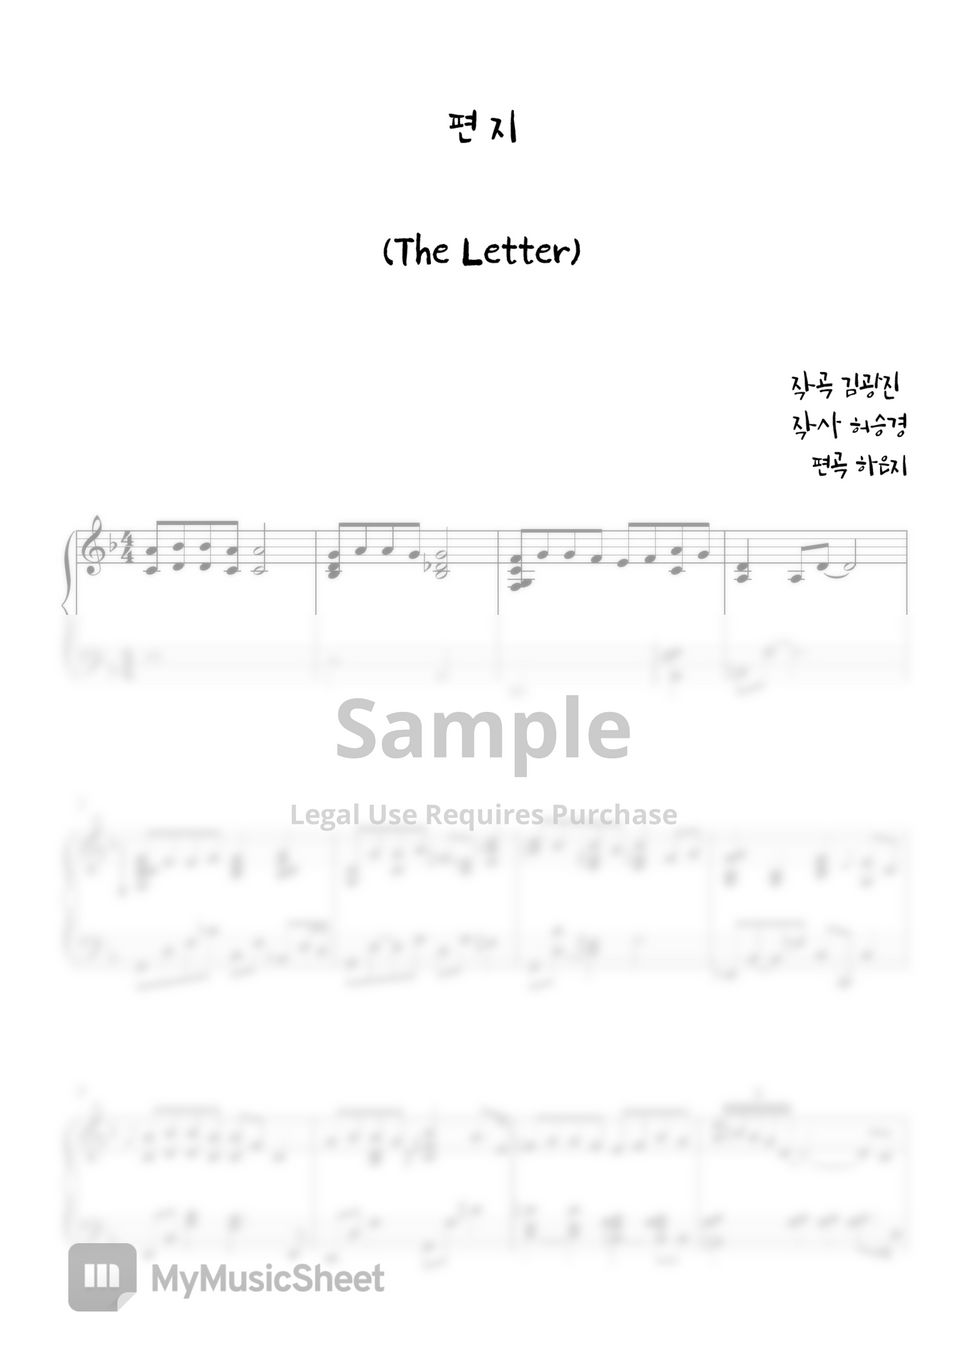 ♬ - The Letter (편지) by Ha EunJee